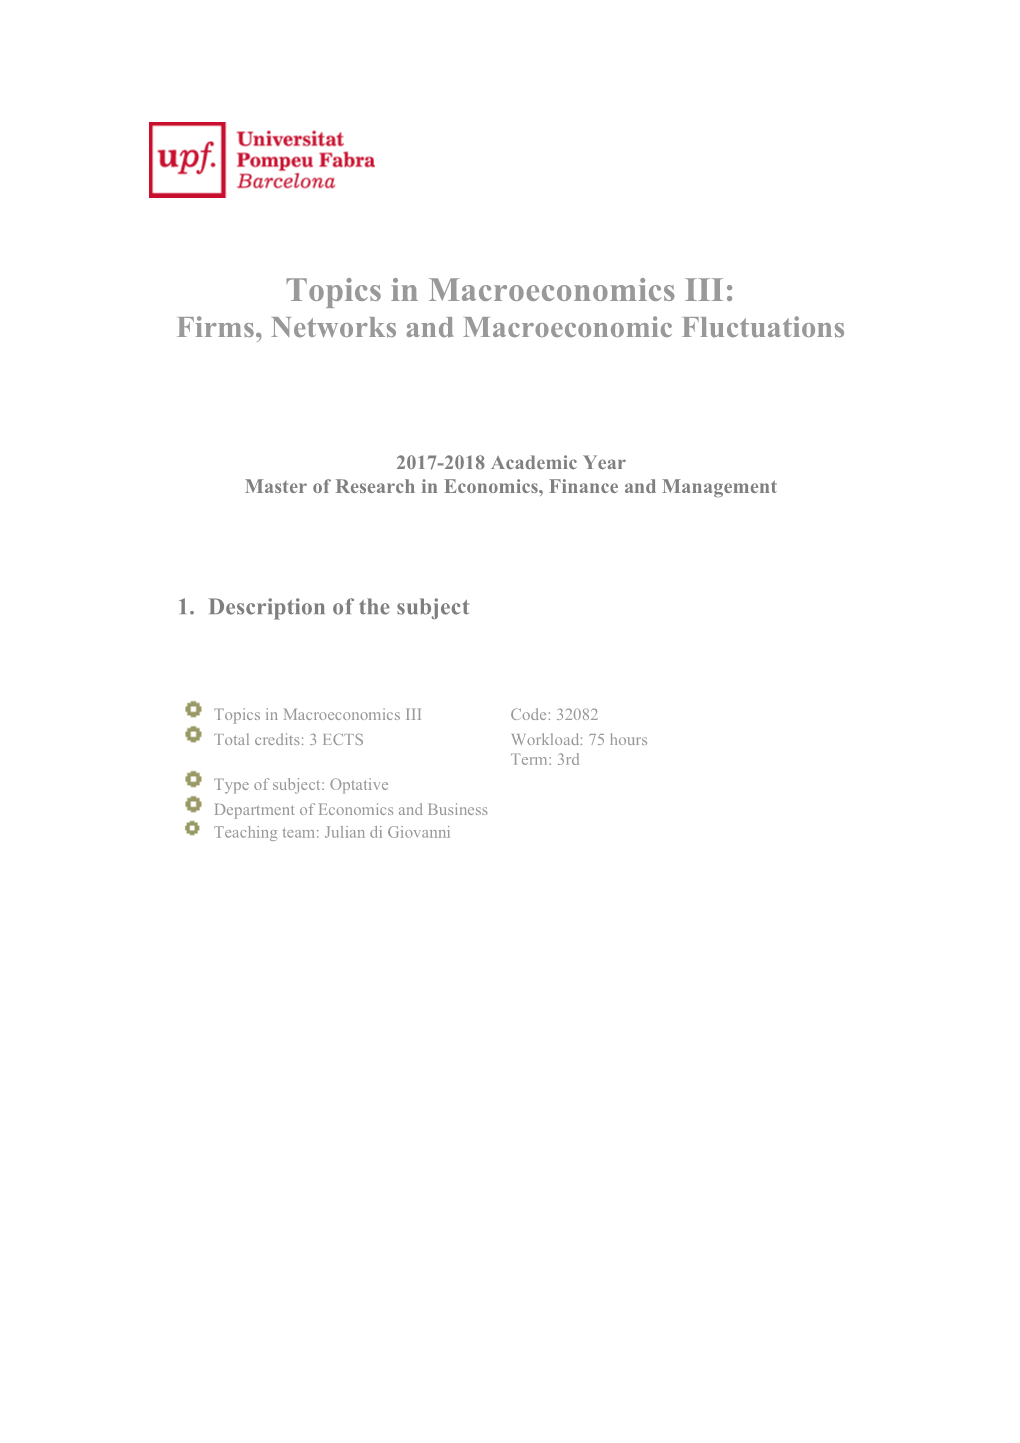 Topics in Macroeconomics III: Firms, Networks and Macroeconomic Fluctuations